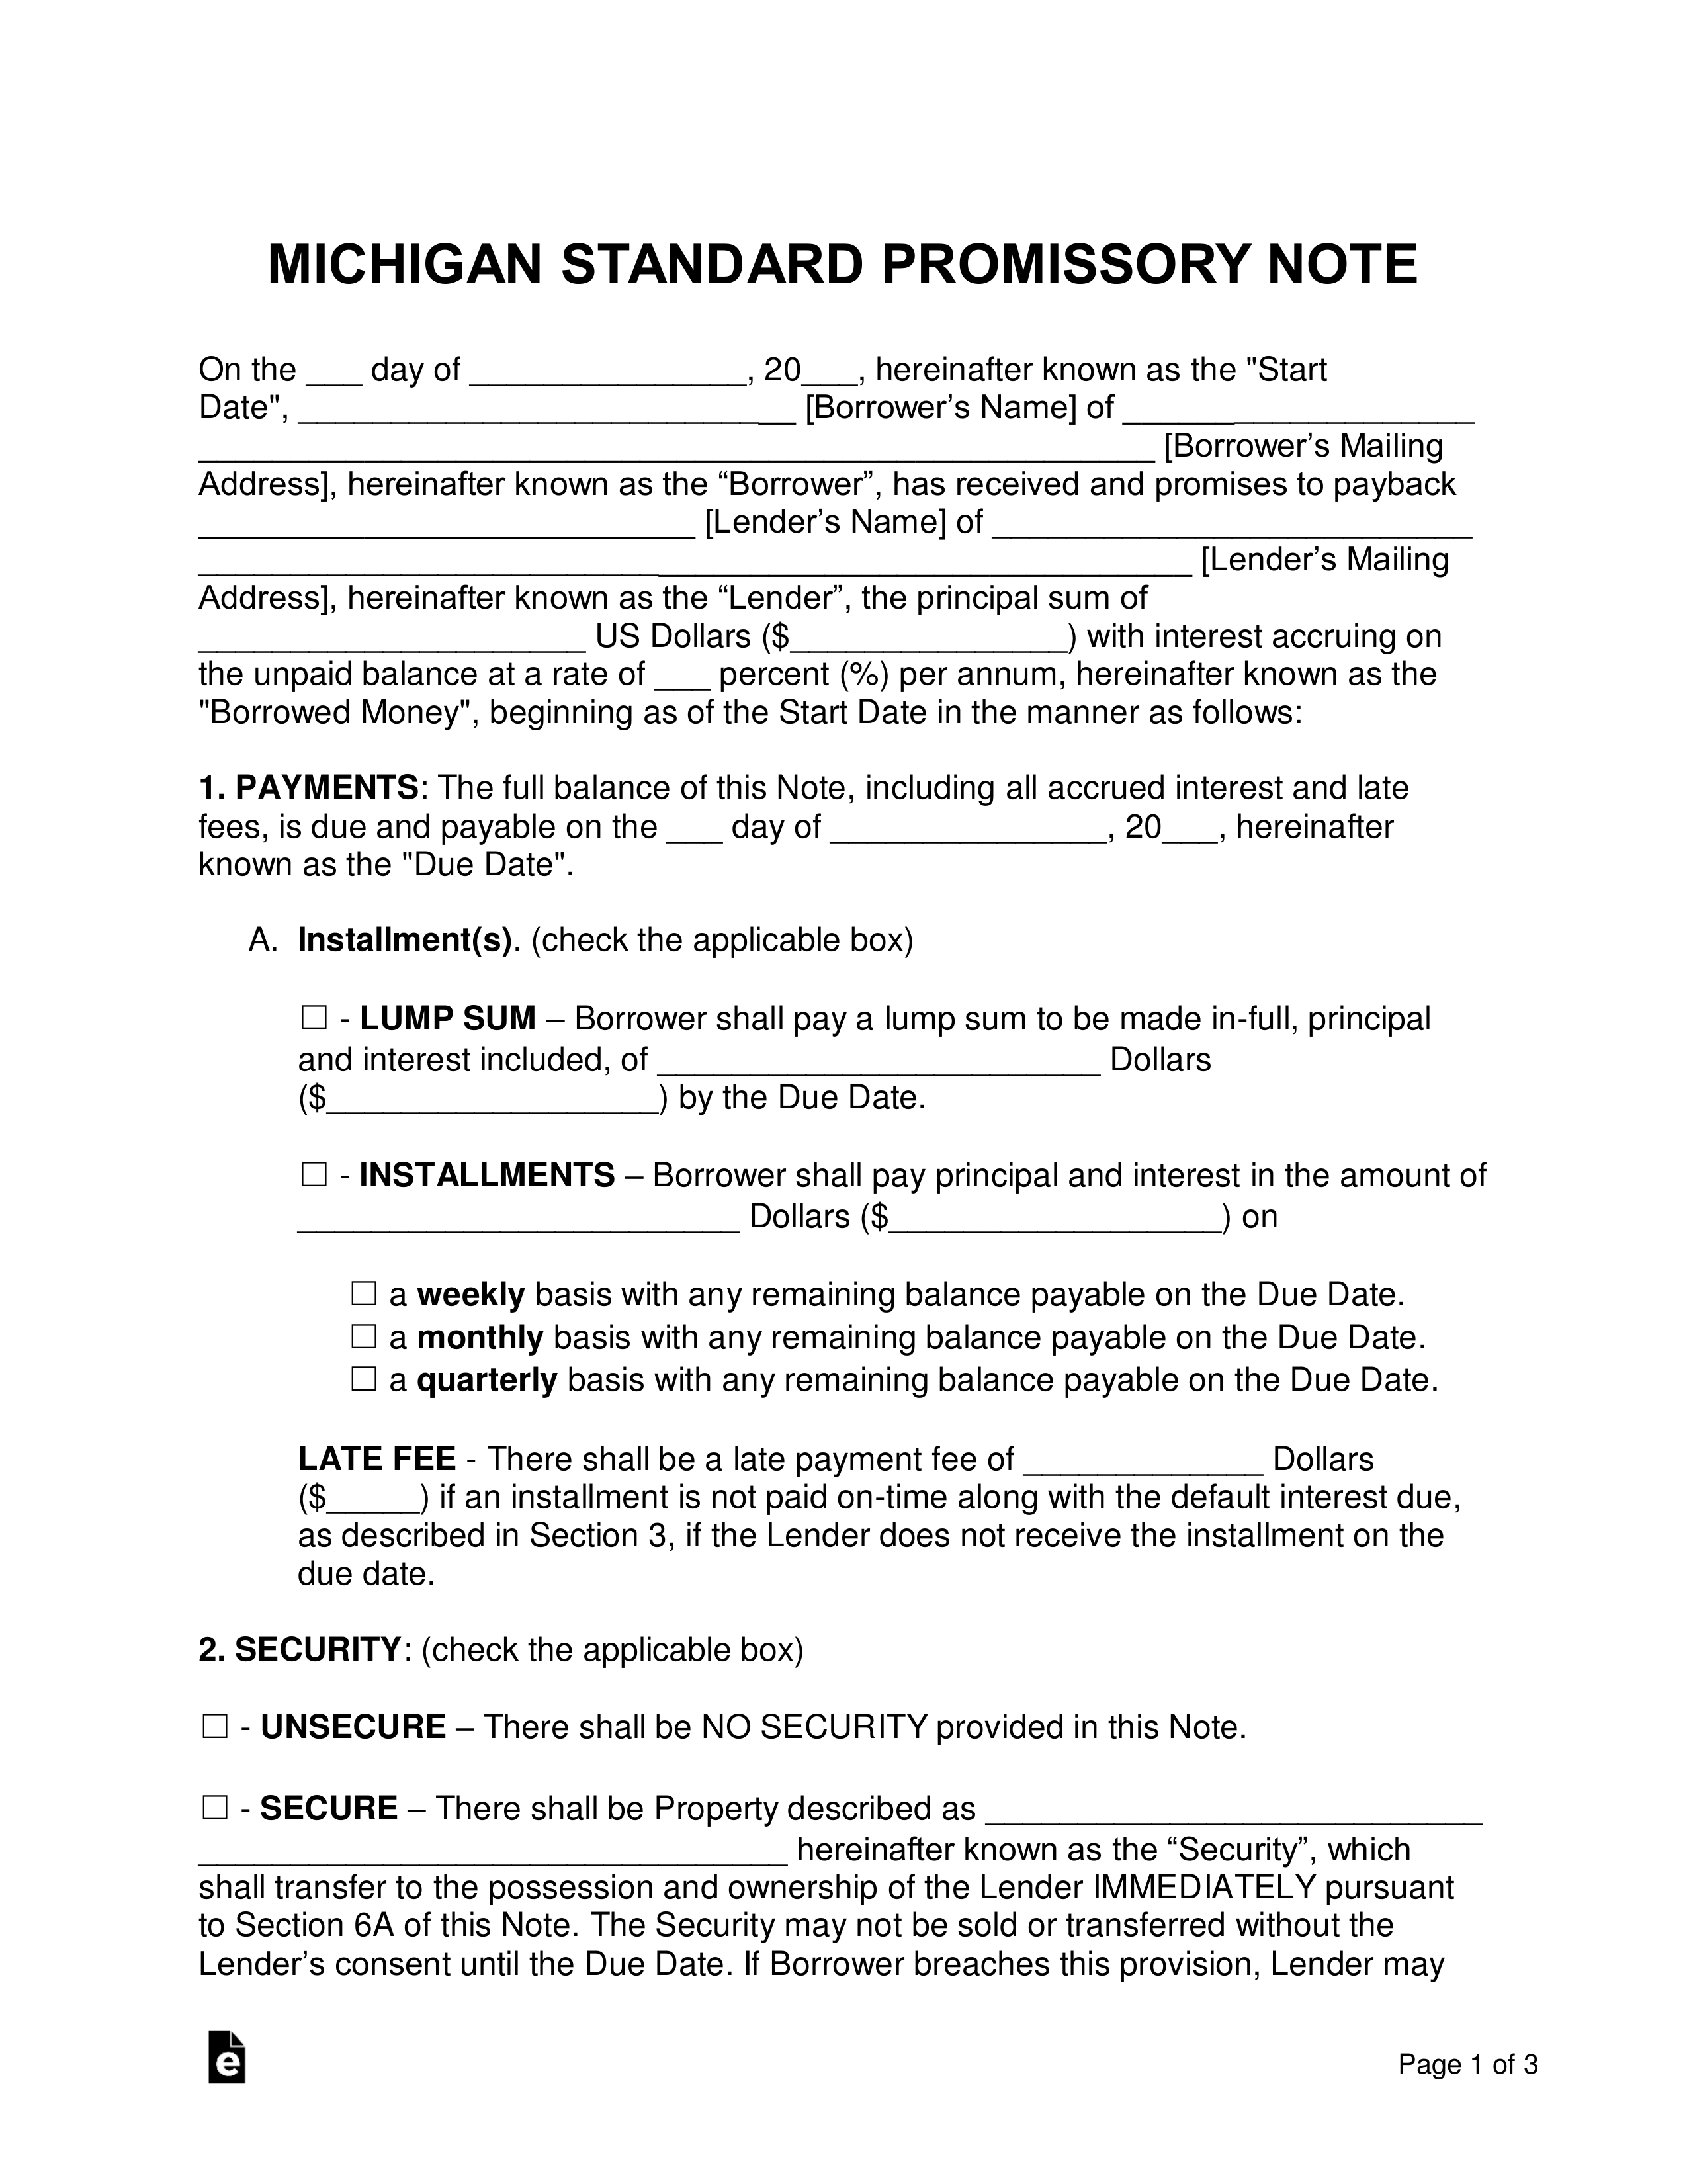 23 year mortgage rates michigan Within Secured Promissory Note Template